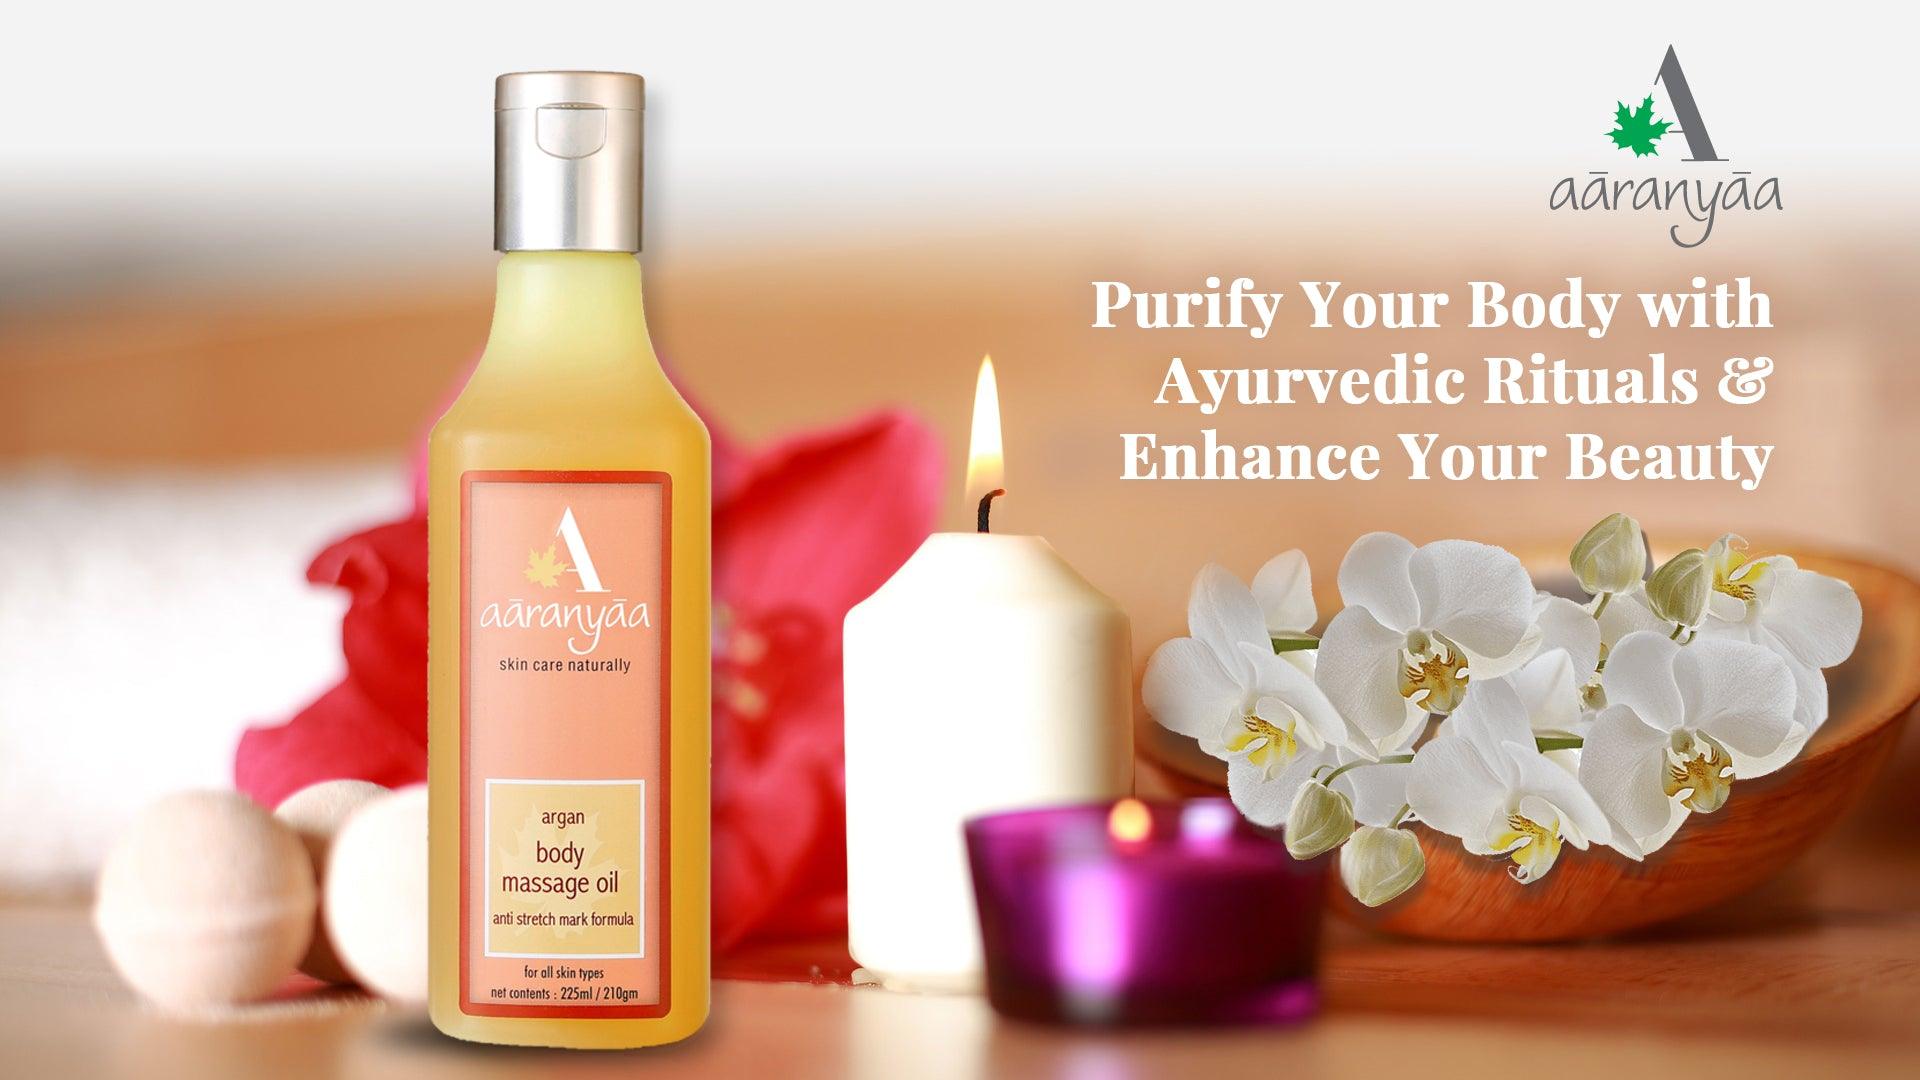 Purify Your Body with Ayurvedic Rituals and Enhance Your Beauty - aaranyaa skincare